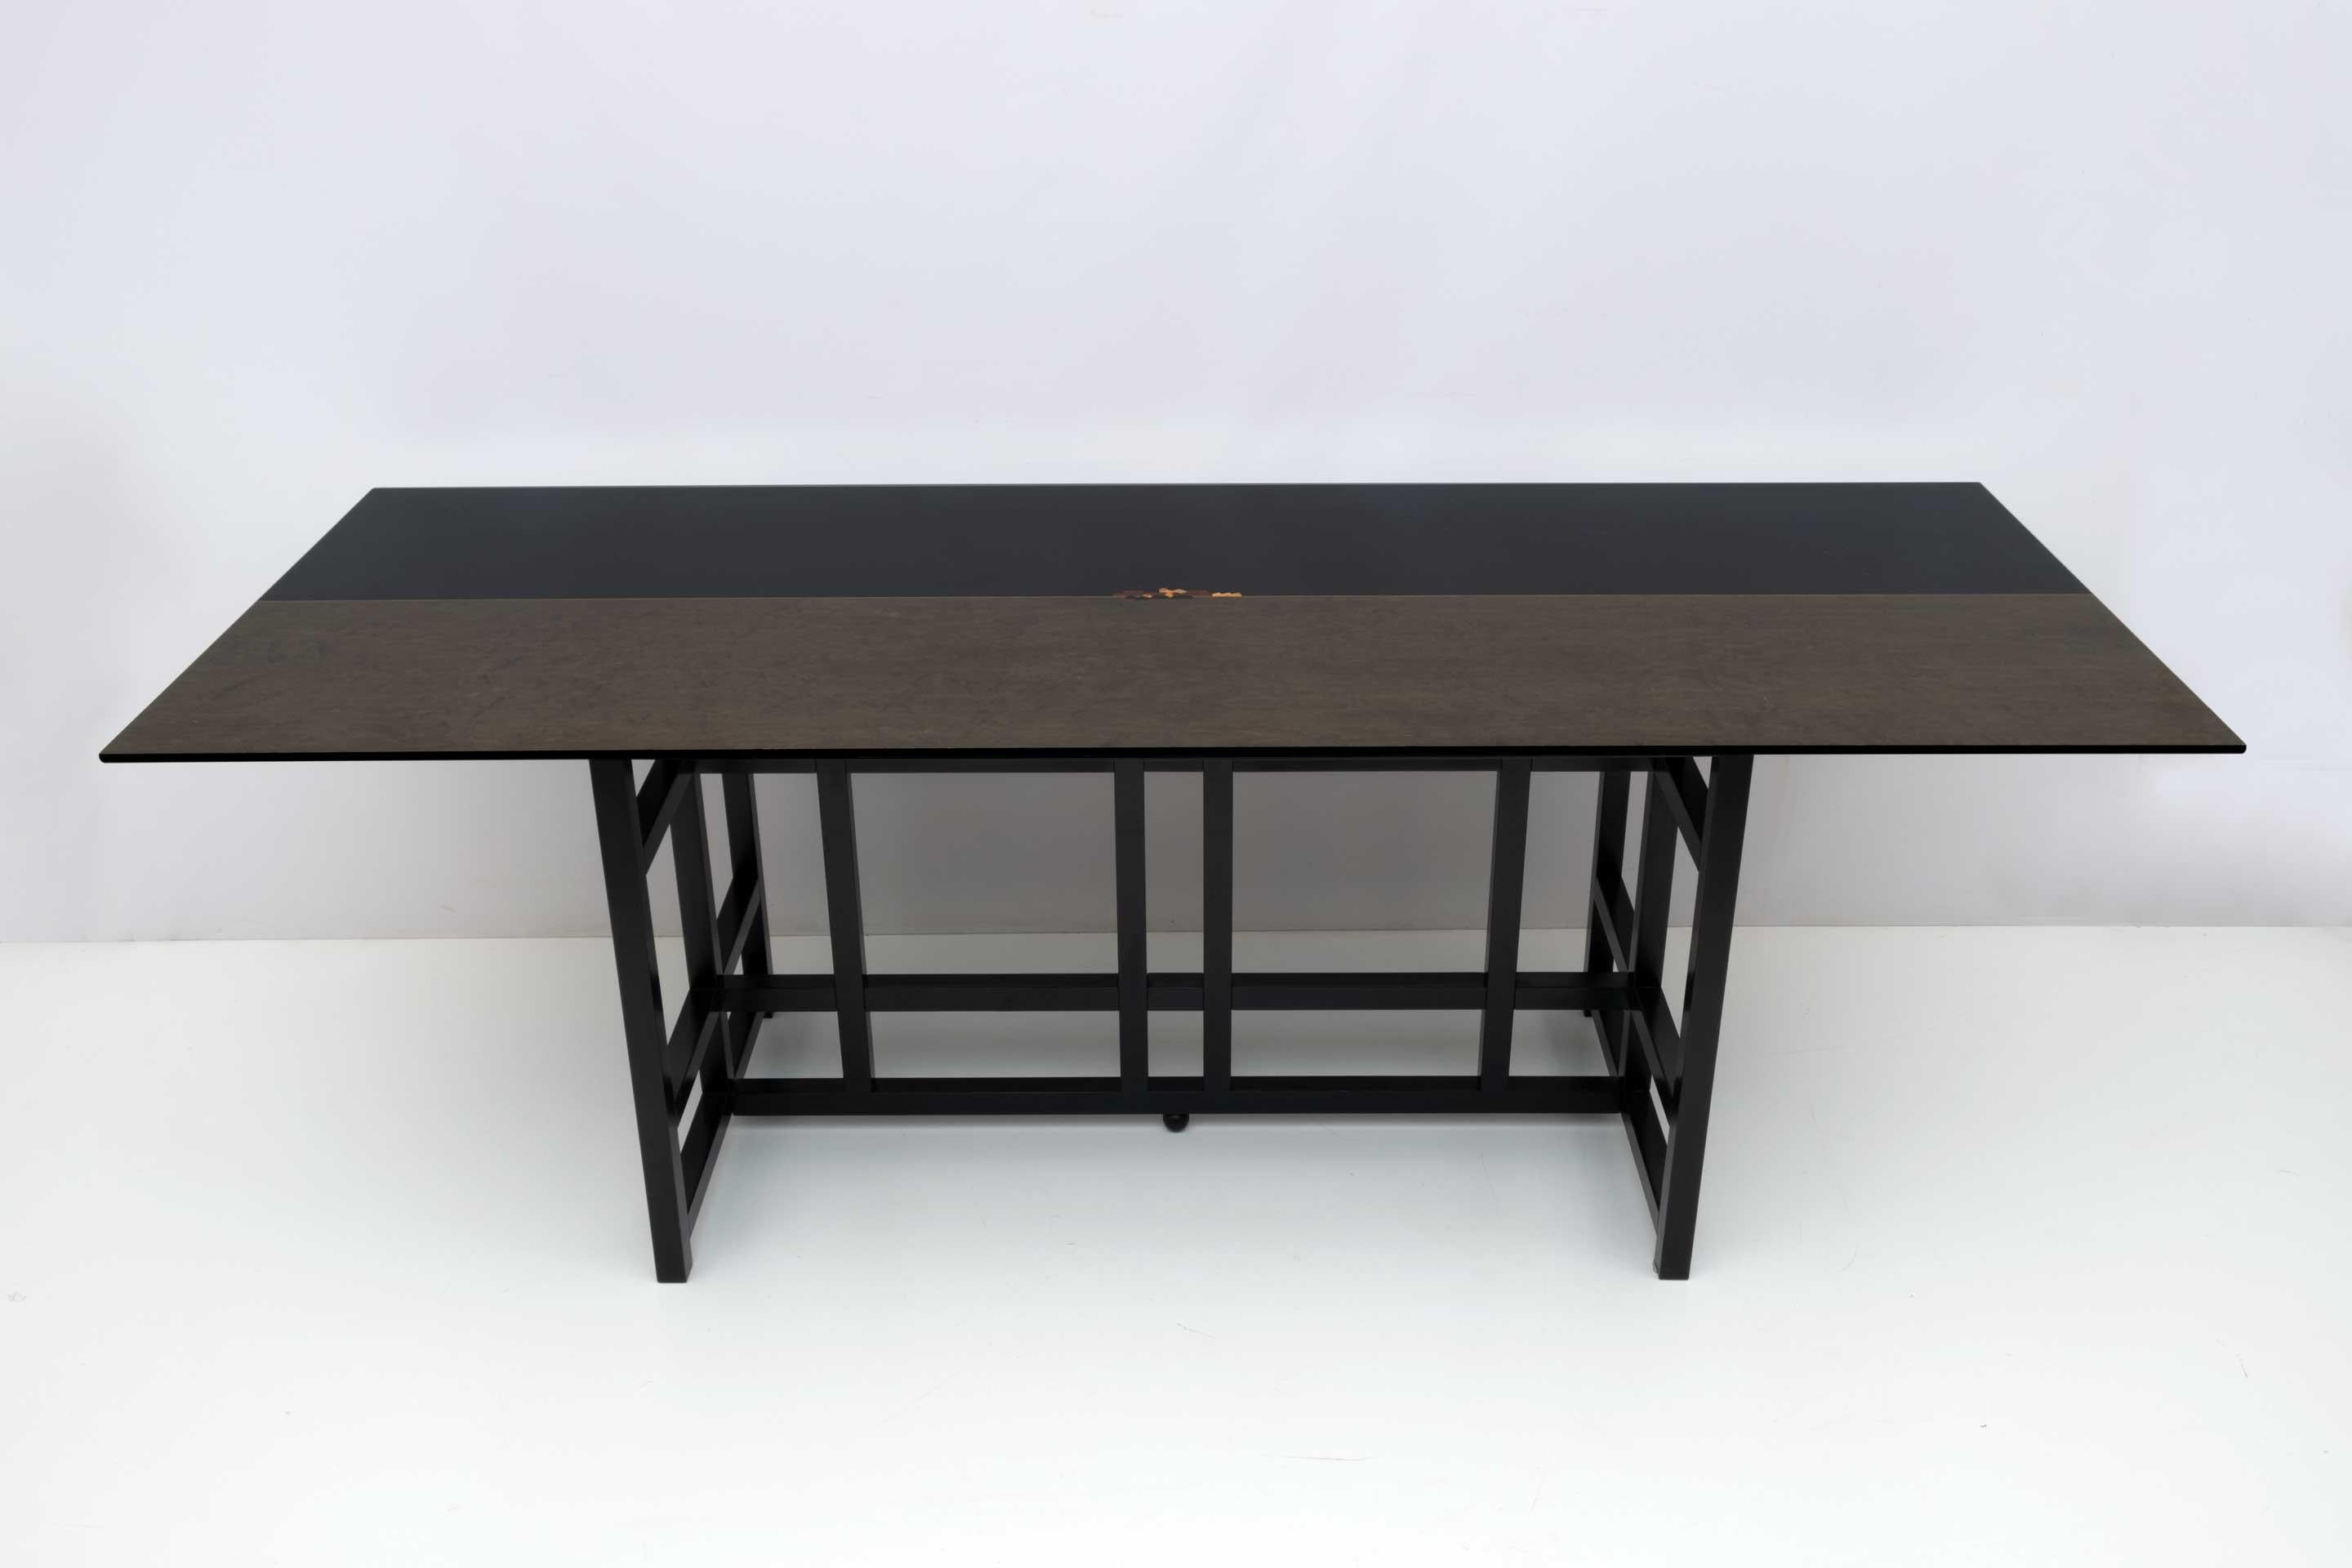 Beautiful table, Italian production from the late 1970s, in the style of Charles Rennie Mackintosh. In black lacquered wood, the top was made in black lacquered wood and grey-brown tinted erable briar, with central inlay.